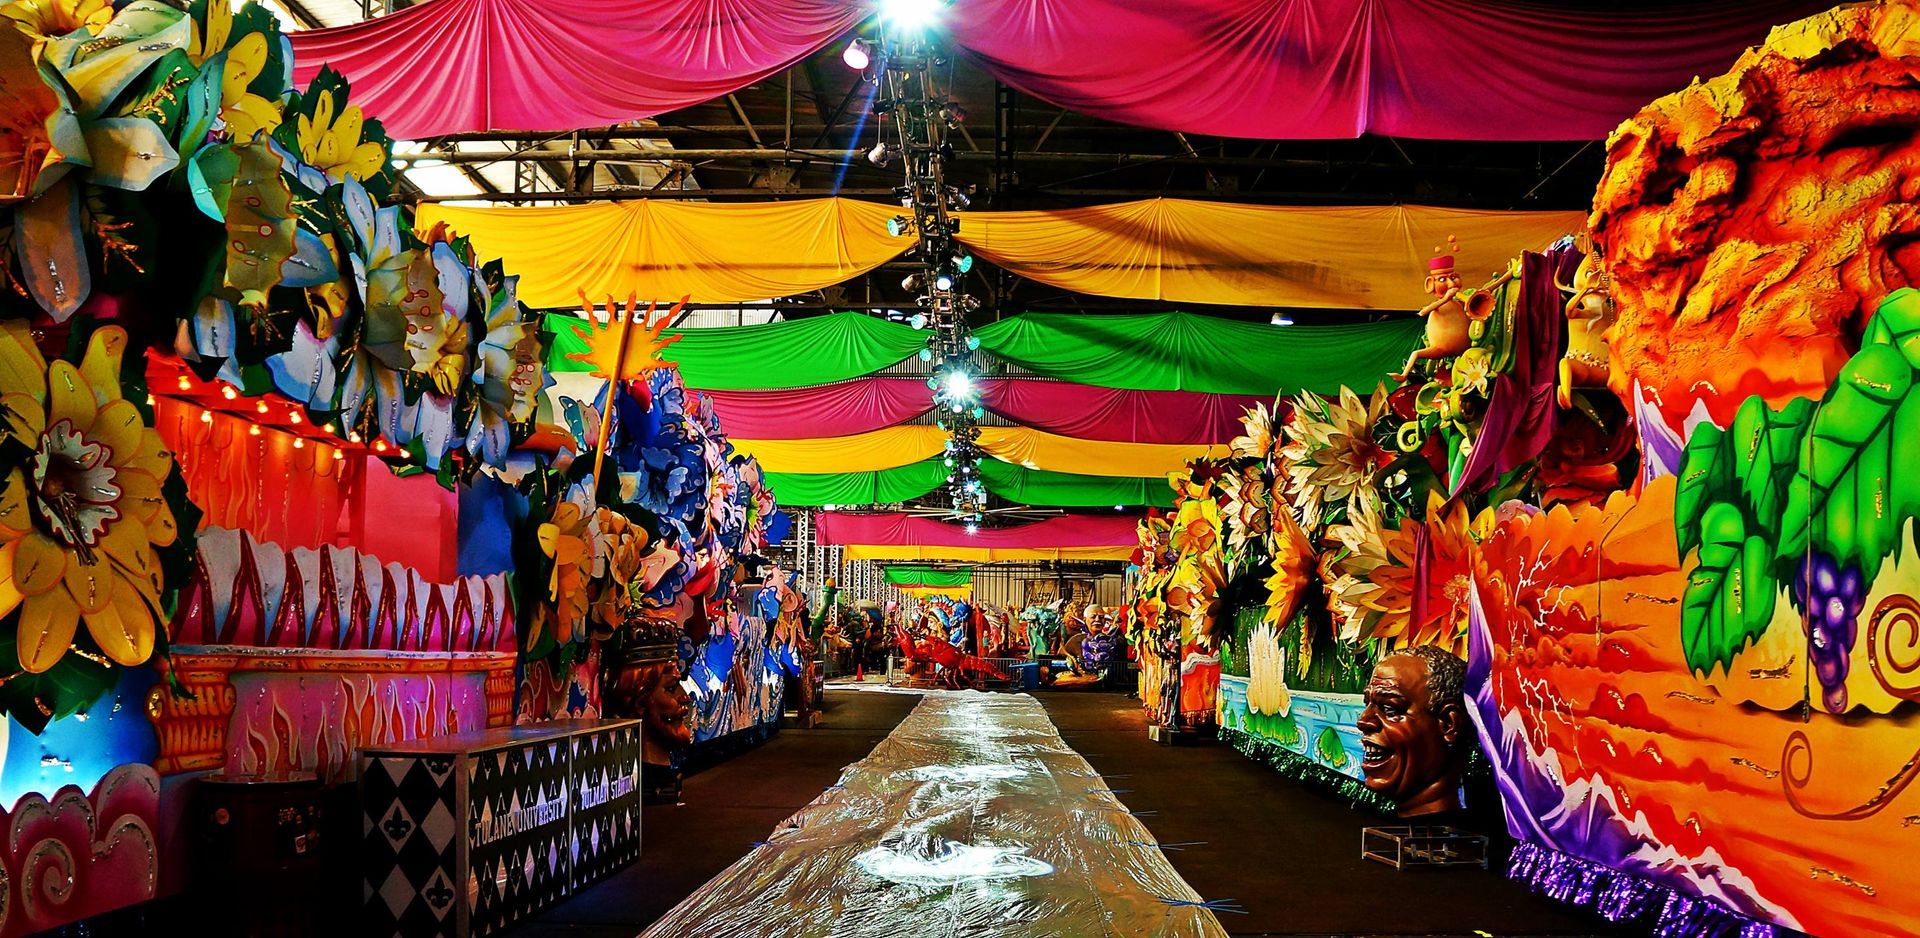  World's largest float designing and building facility: world record in New Orleans, Louisiana